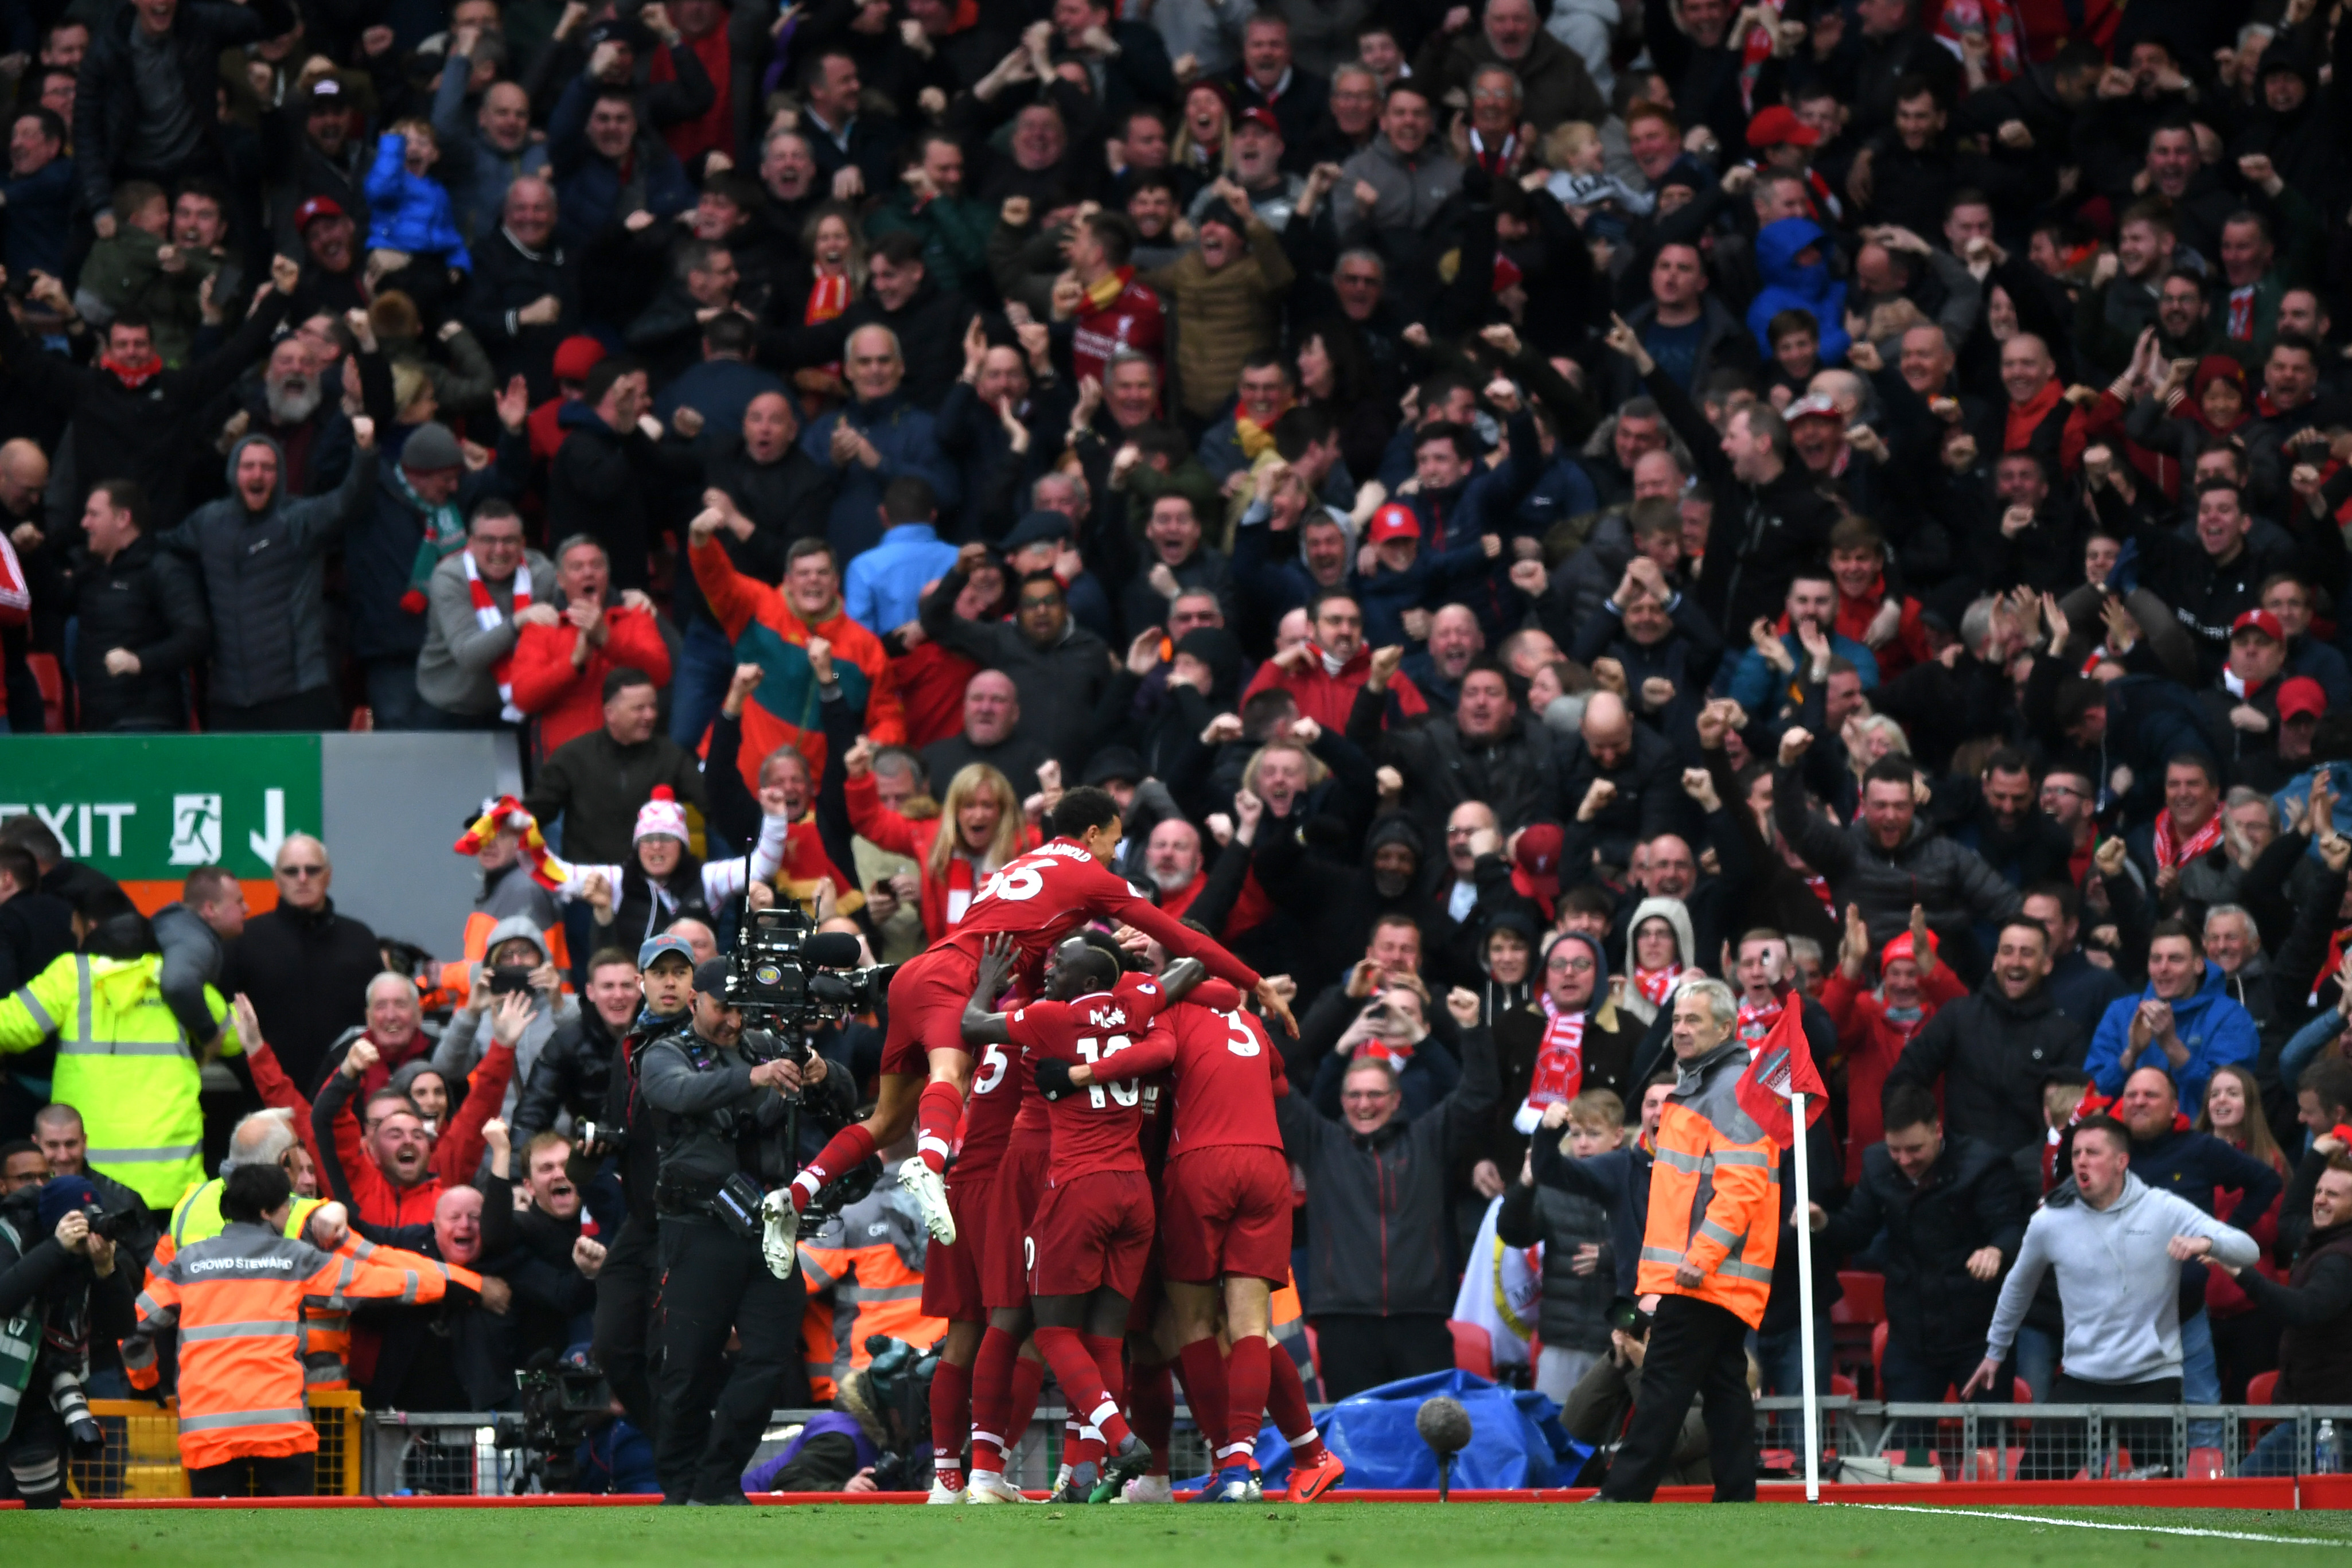 LIVERPOOL, ENGLAND - MARCH 31:  Liverpool celebrate their second goal during the Premier League match between Liverpool FC and Tottenham Hotspur at Anfield on March 31, 2019 in Liverpool, United Kingdom. (Photo by Shaun Botterill/Getty Images)